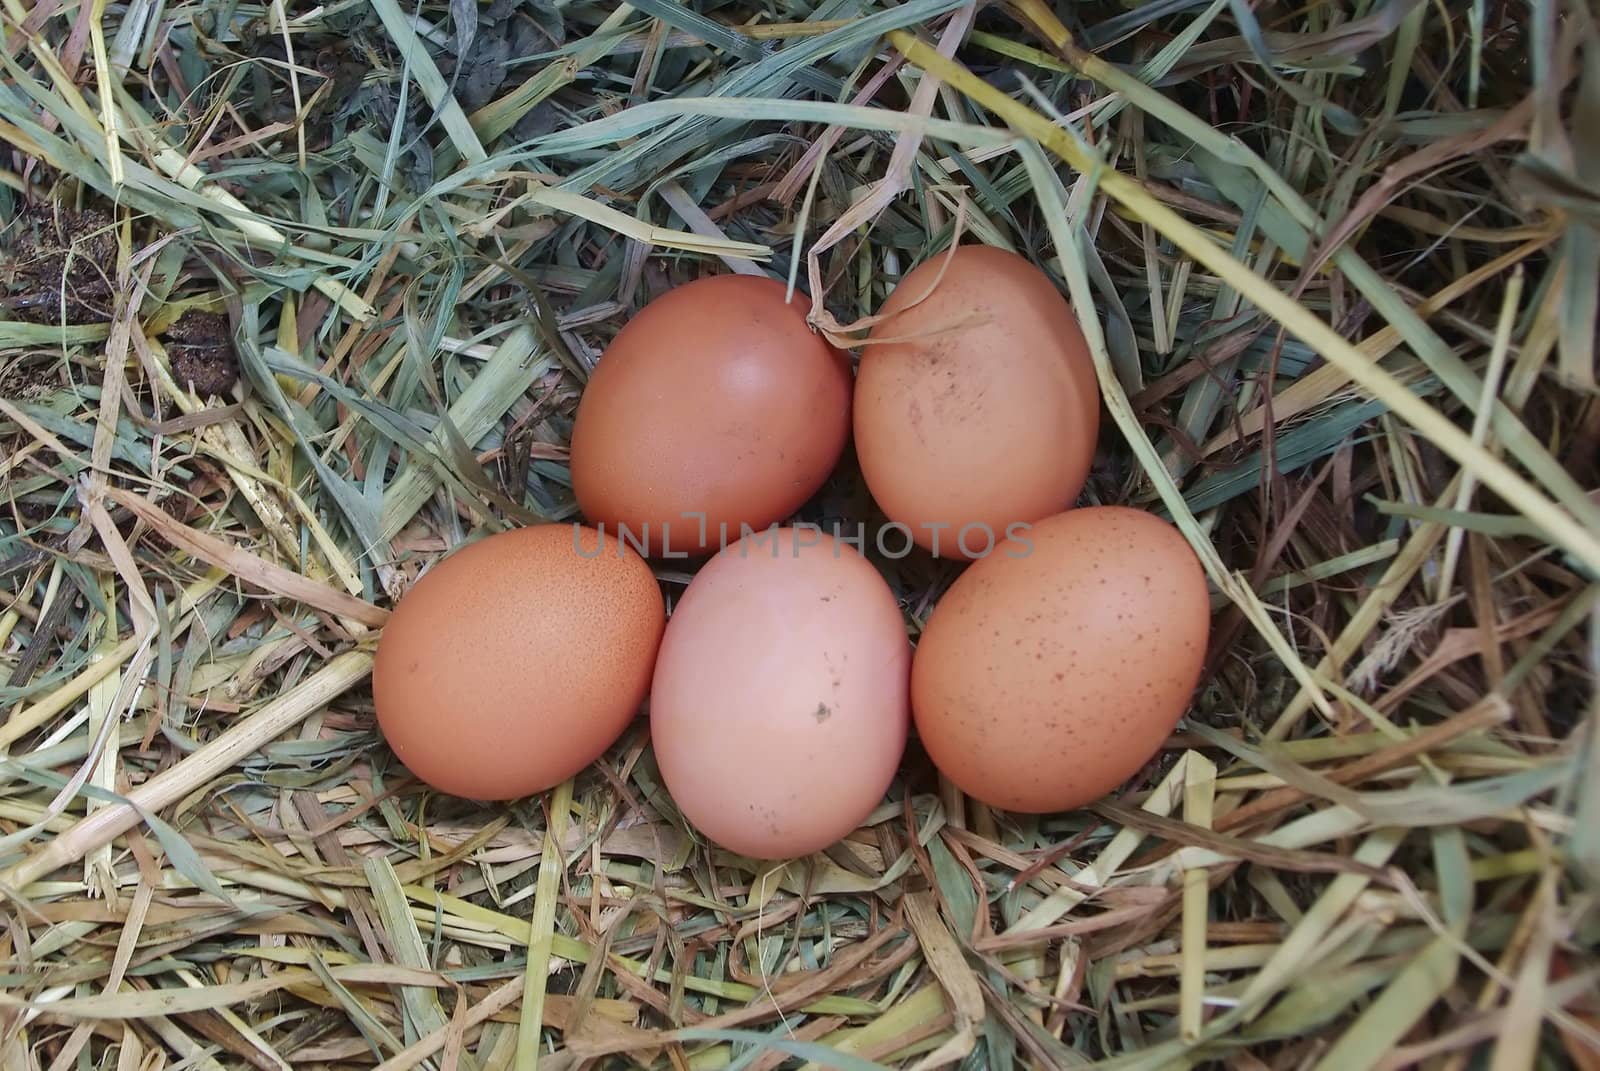 Five brown chicken eggs in the nest of dry grass